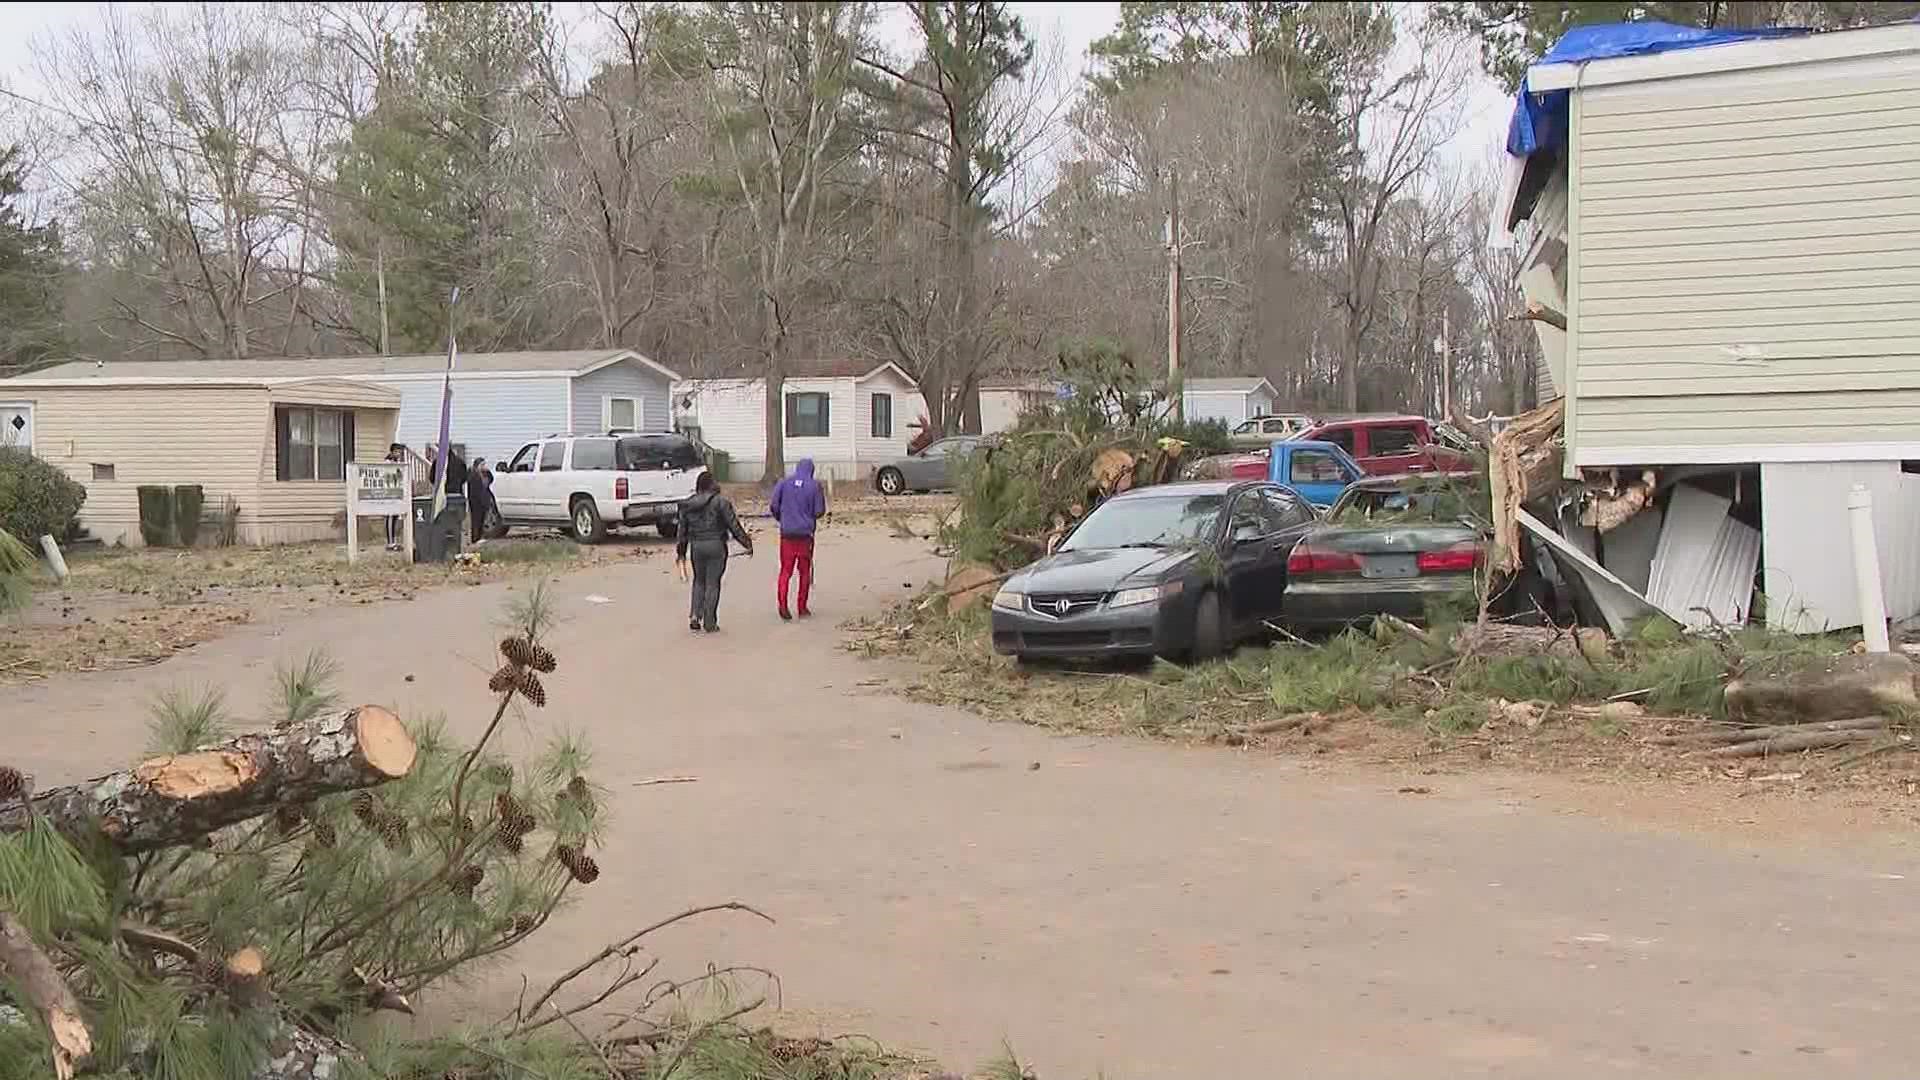 County officials said 5 tornadoes likely went through the area.